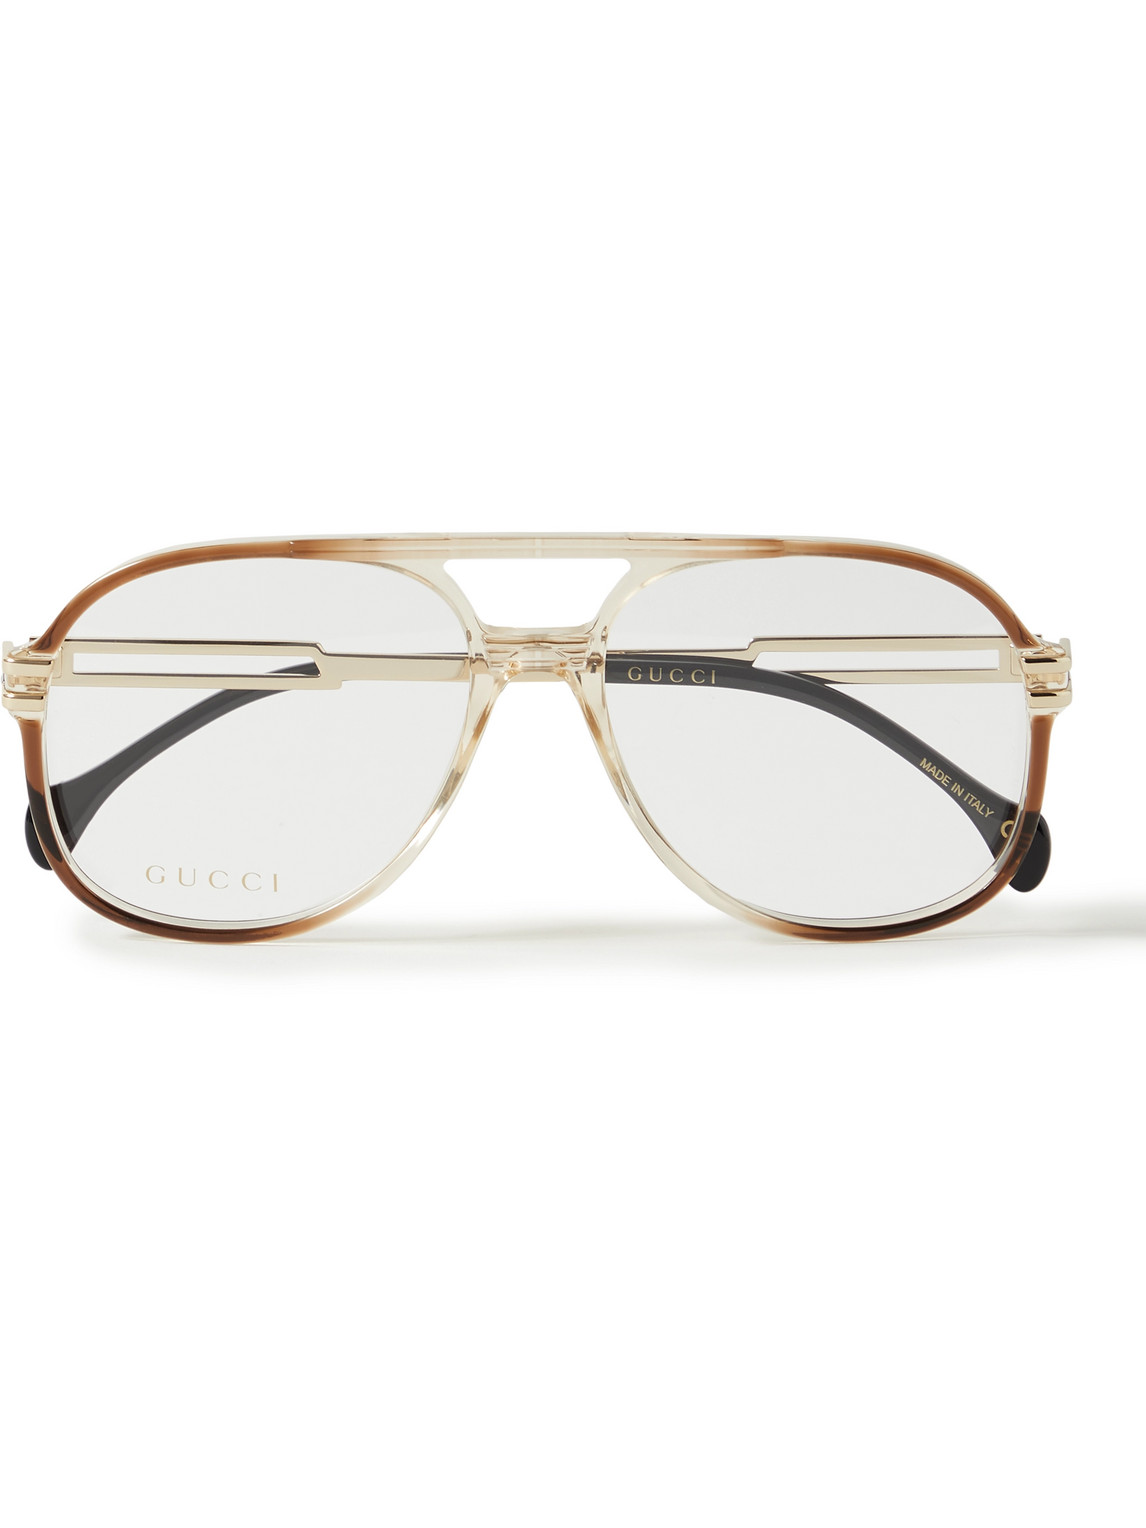 GUCCI AVIATOR-STYLE ACETATE AND GOLD-TONE OPTICAL GLASSES